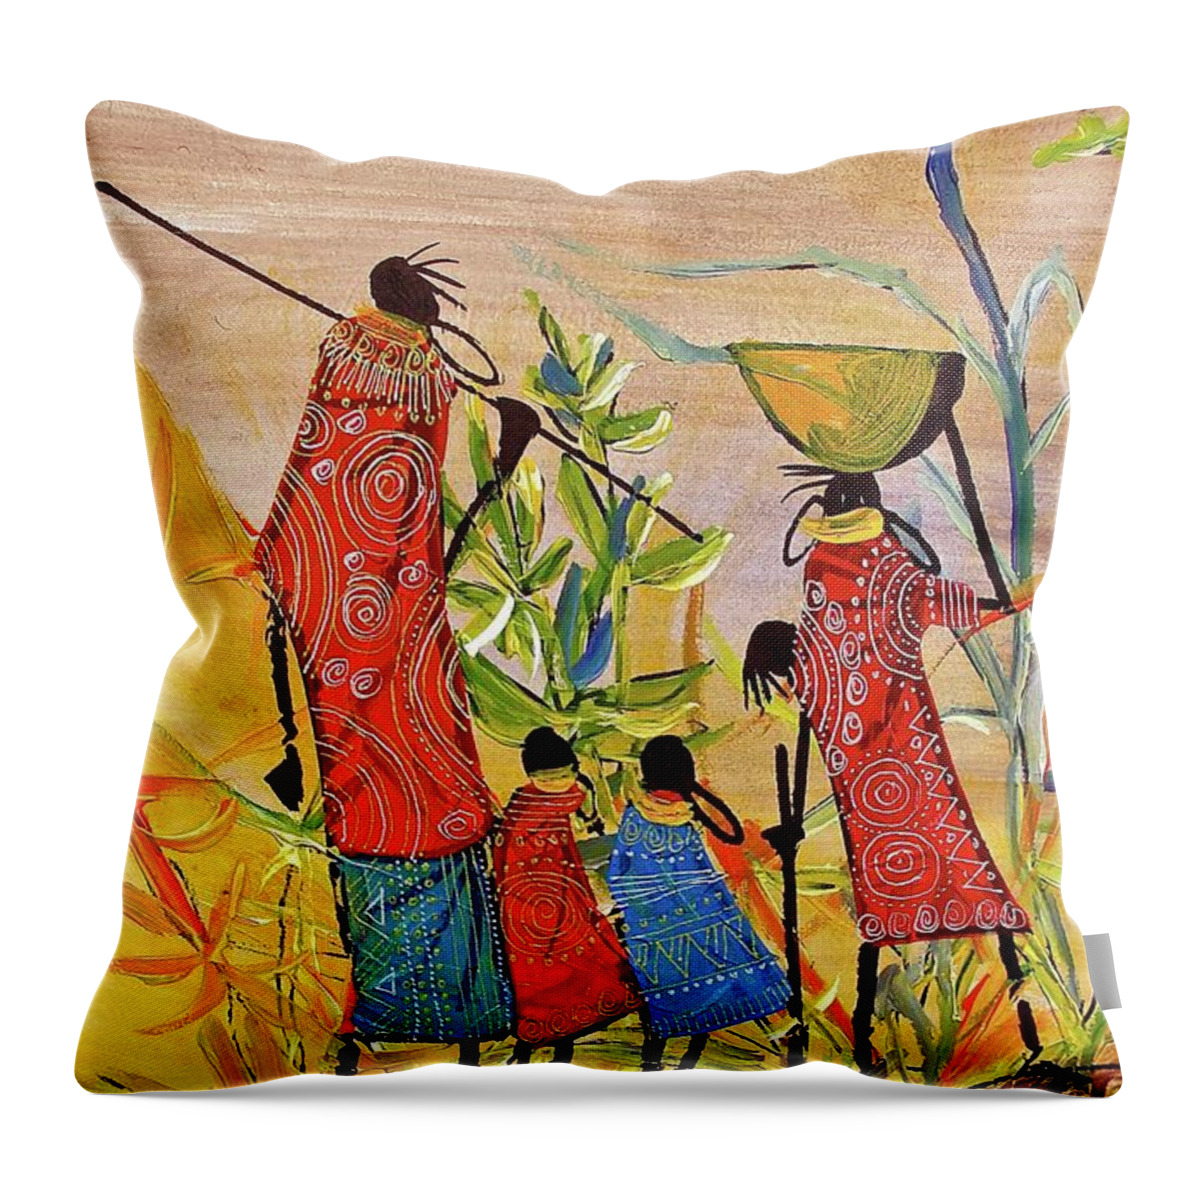 Africa Throw Pillow featuring the painting B-272 by Martin Bulinya